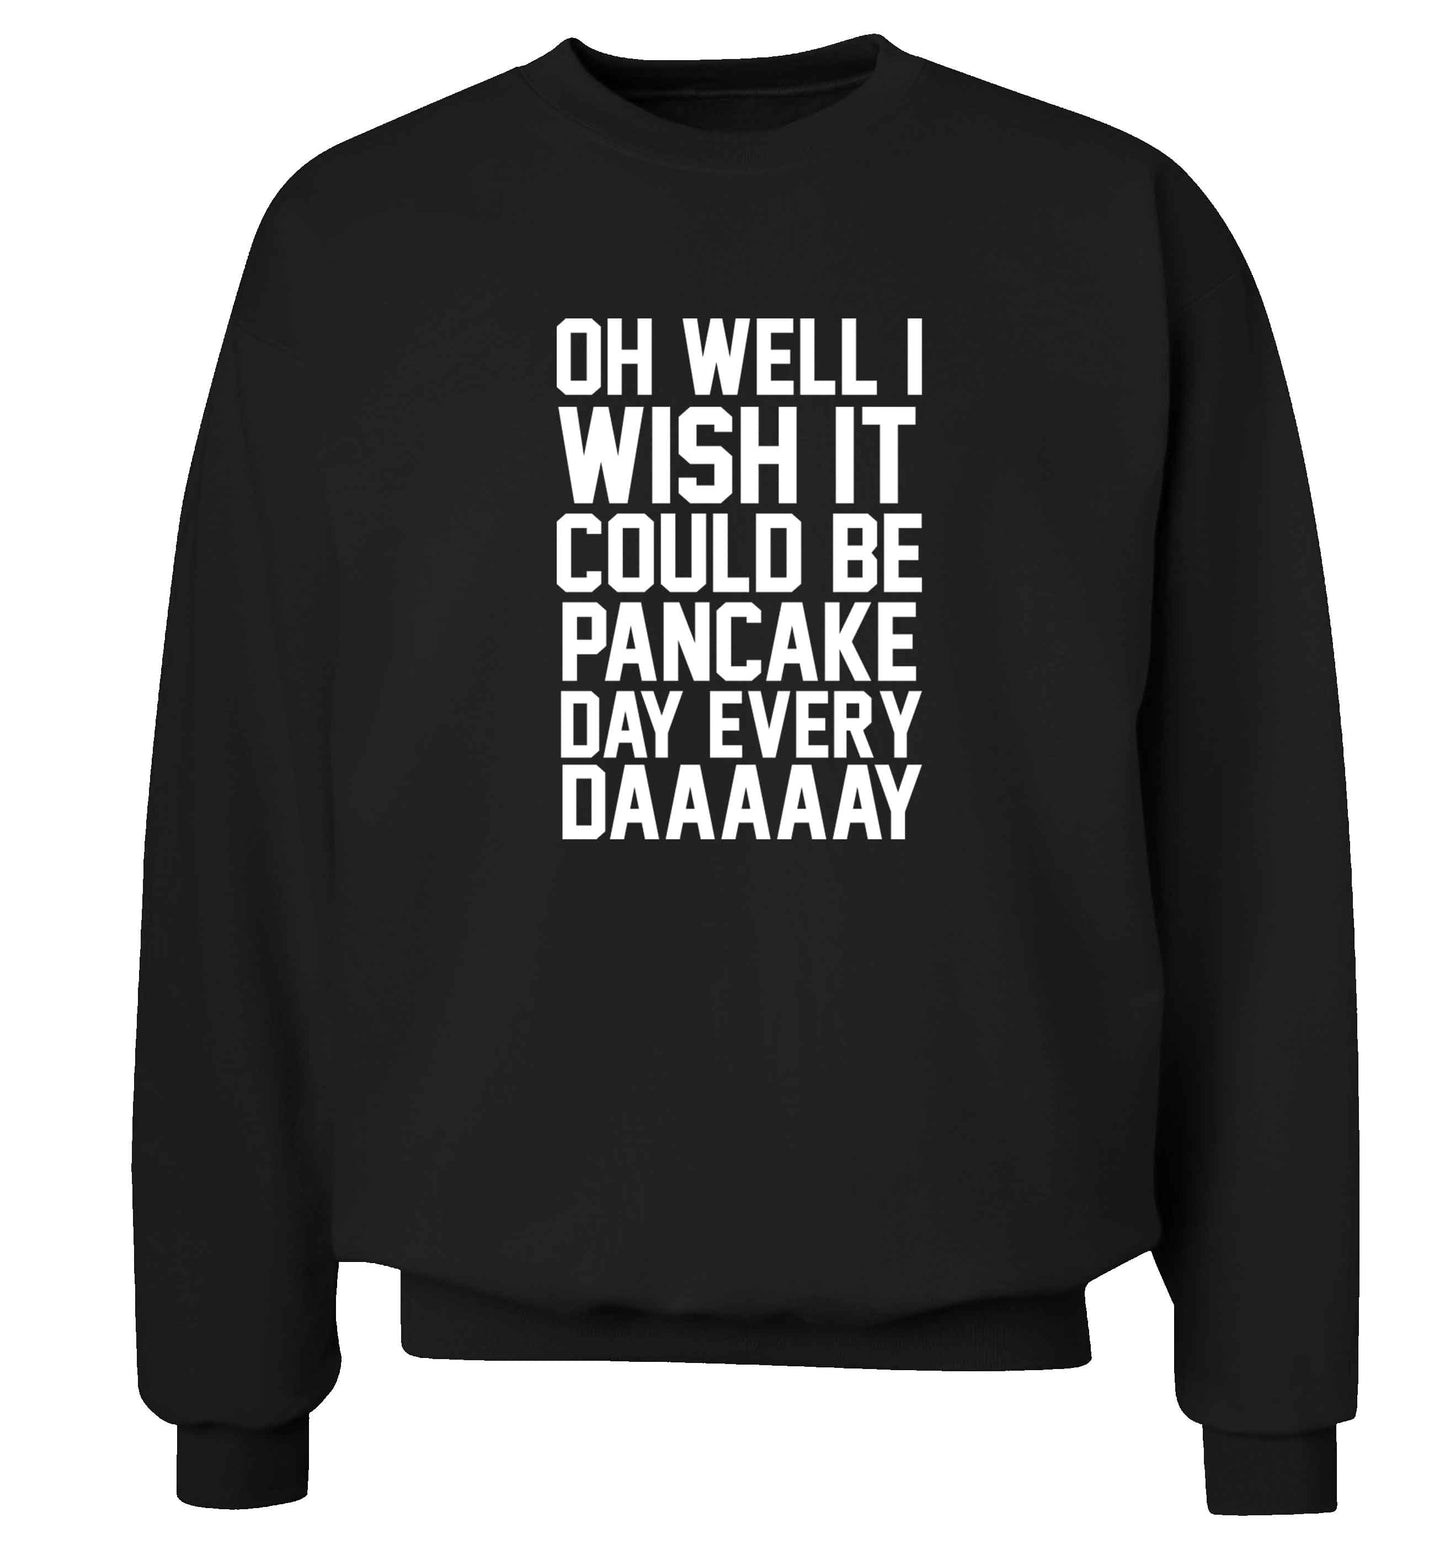 Oh well I wish it could be pancake day every day adult's unisex black sweater 2XL